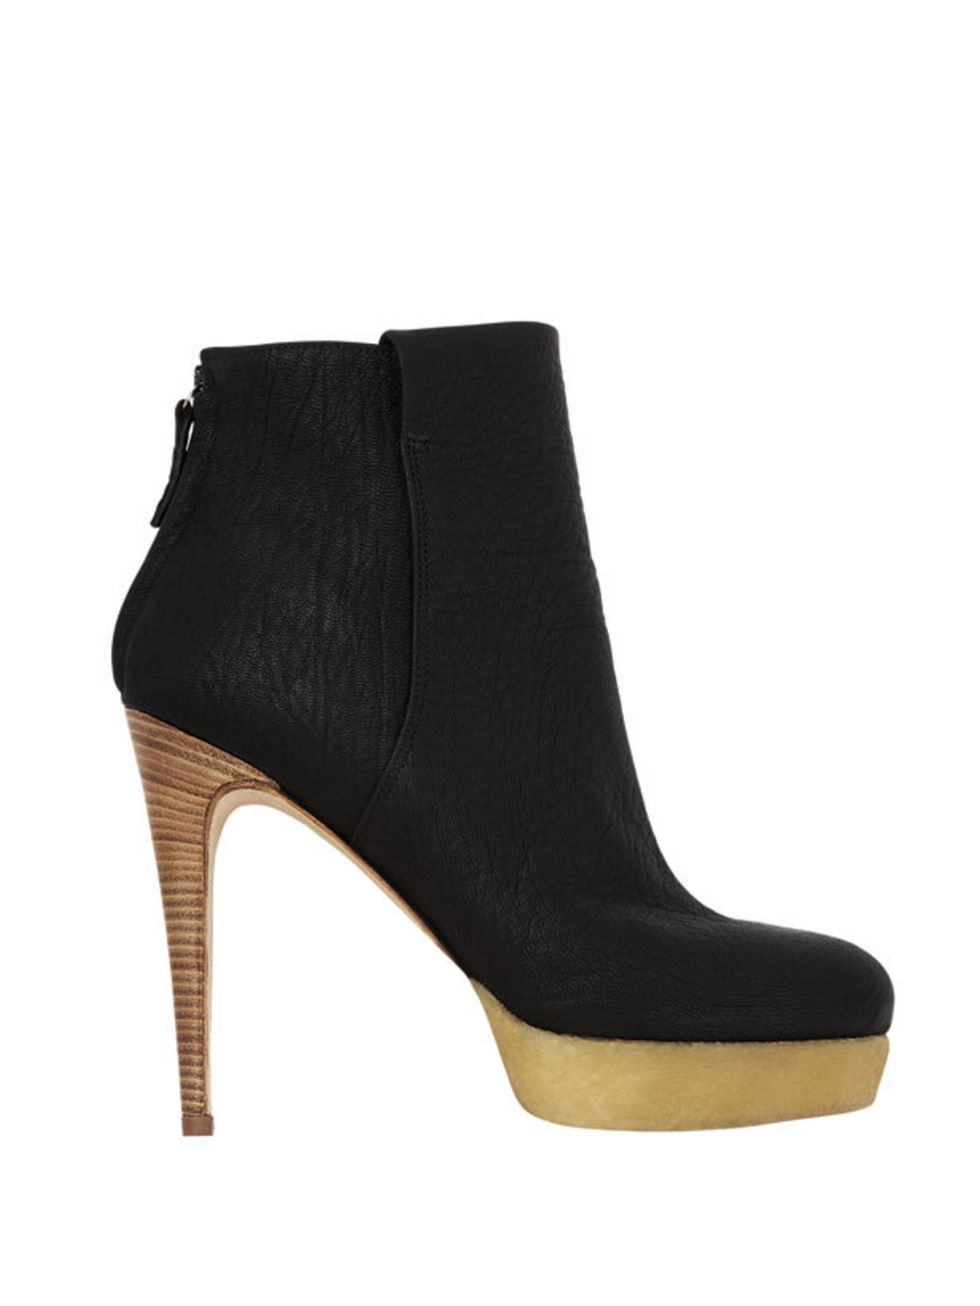 <p>Cos ankle boots, £150, call 0207 478 0400 for stockists</p>